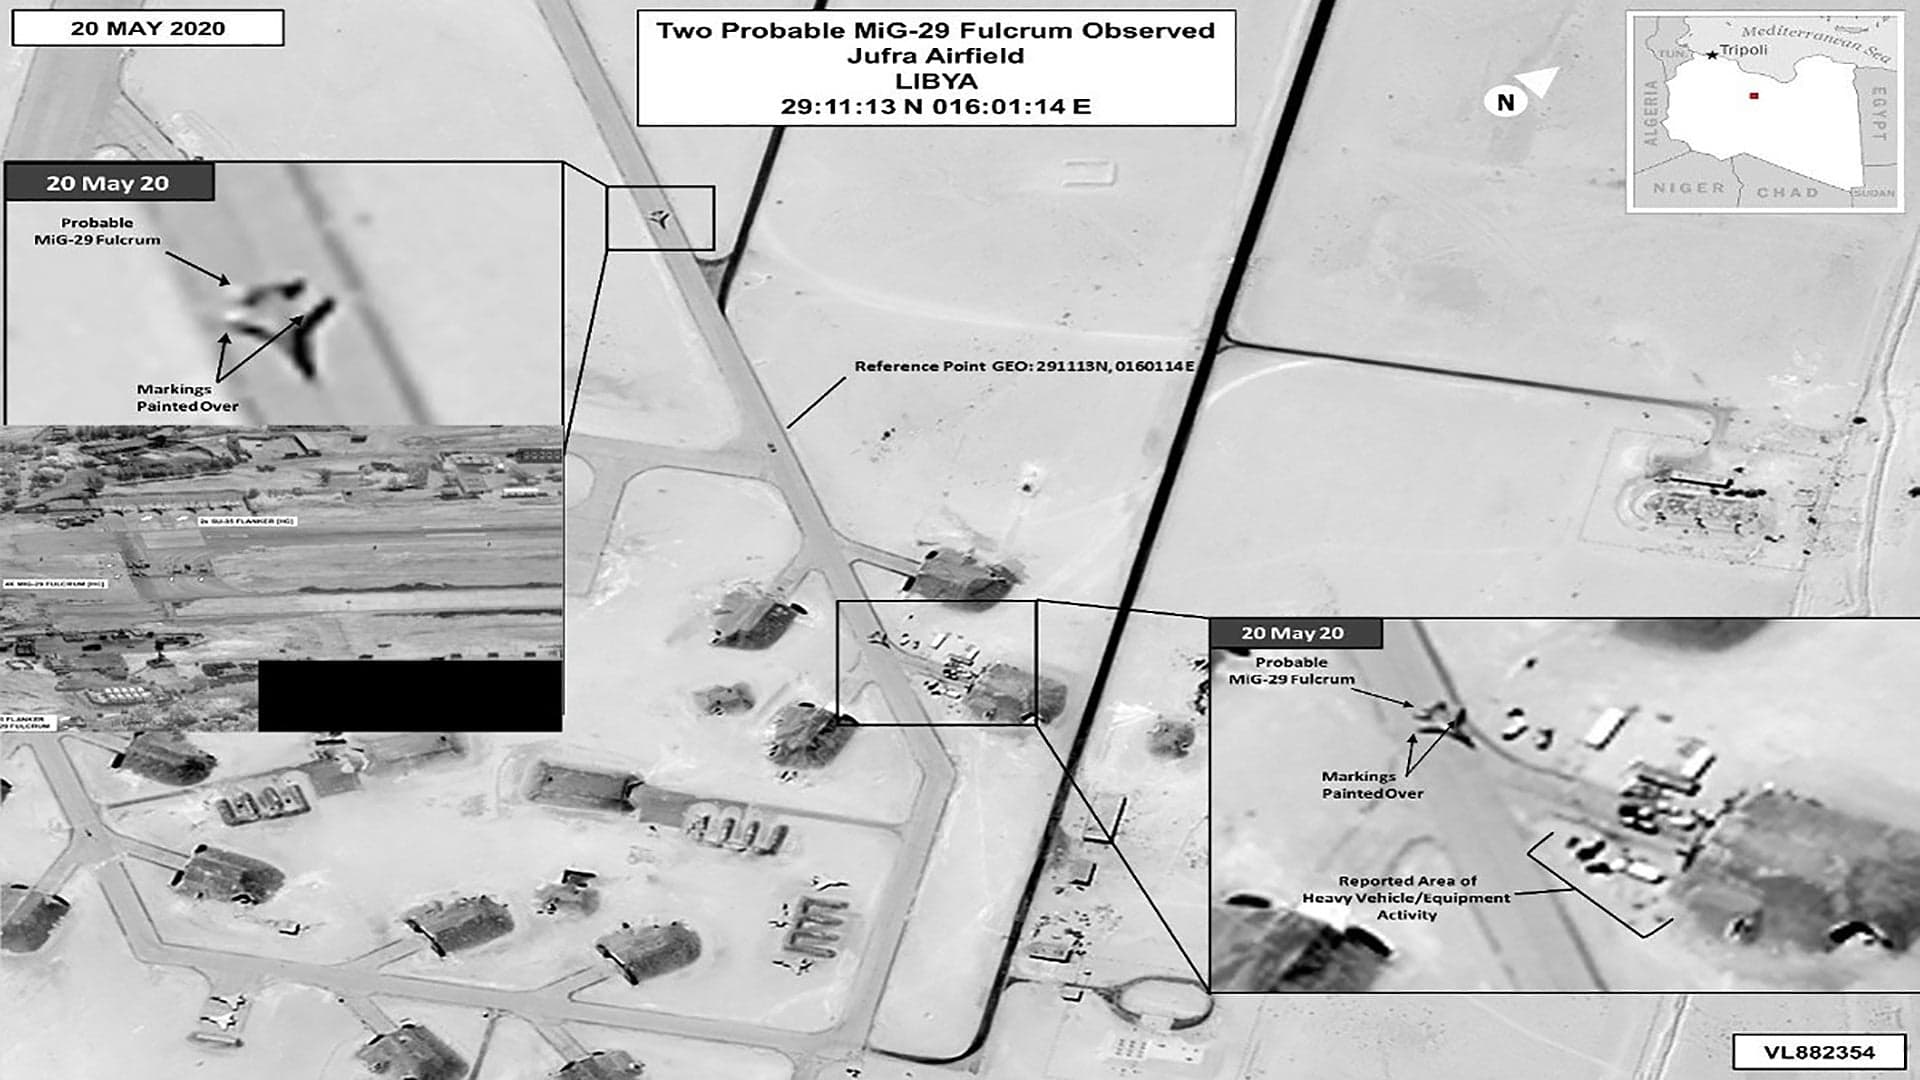 Russia Now Has At Least 14 Combat Jets In Libya As Satellite Images Reveal New Details